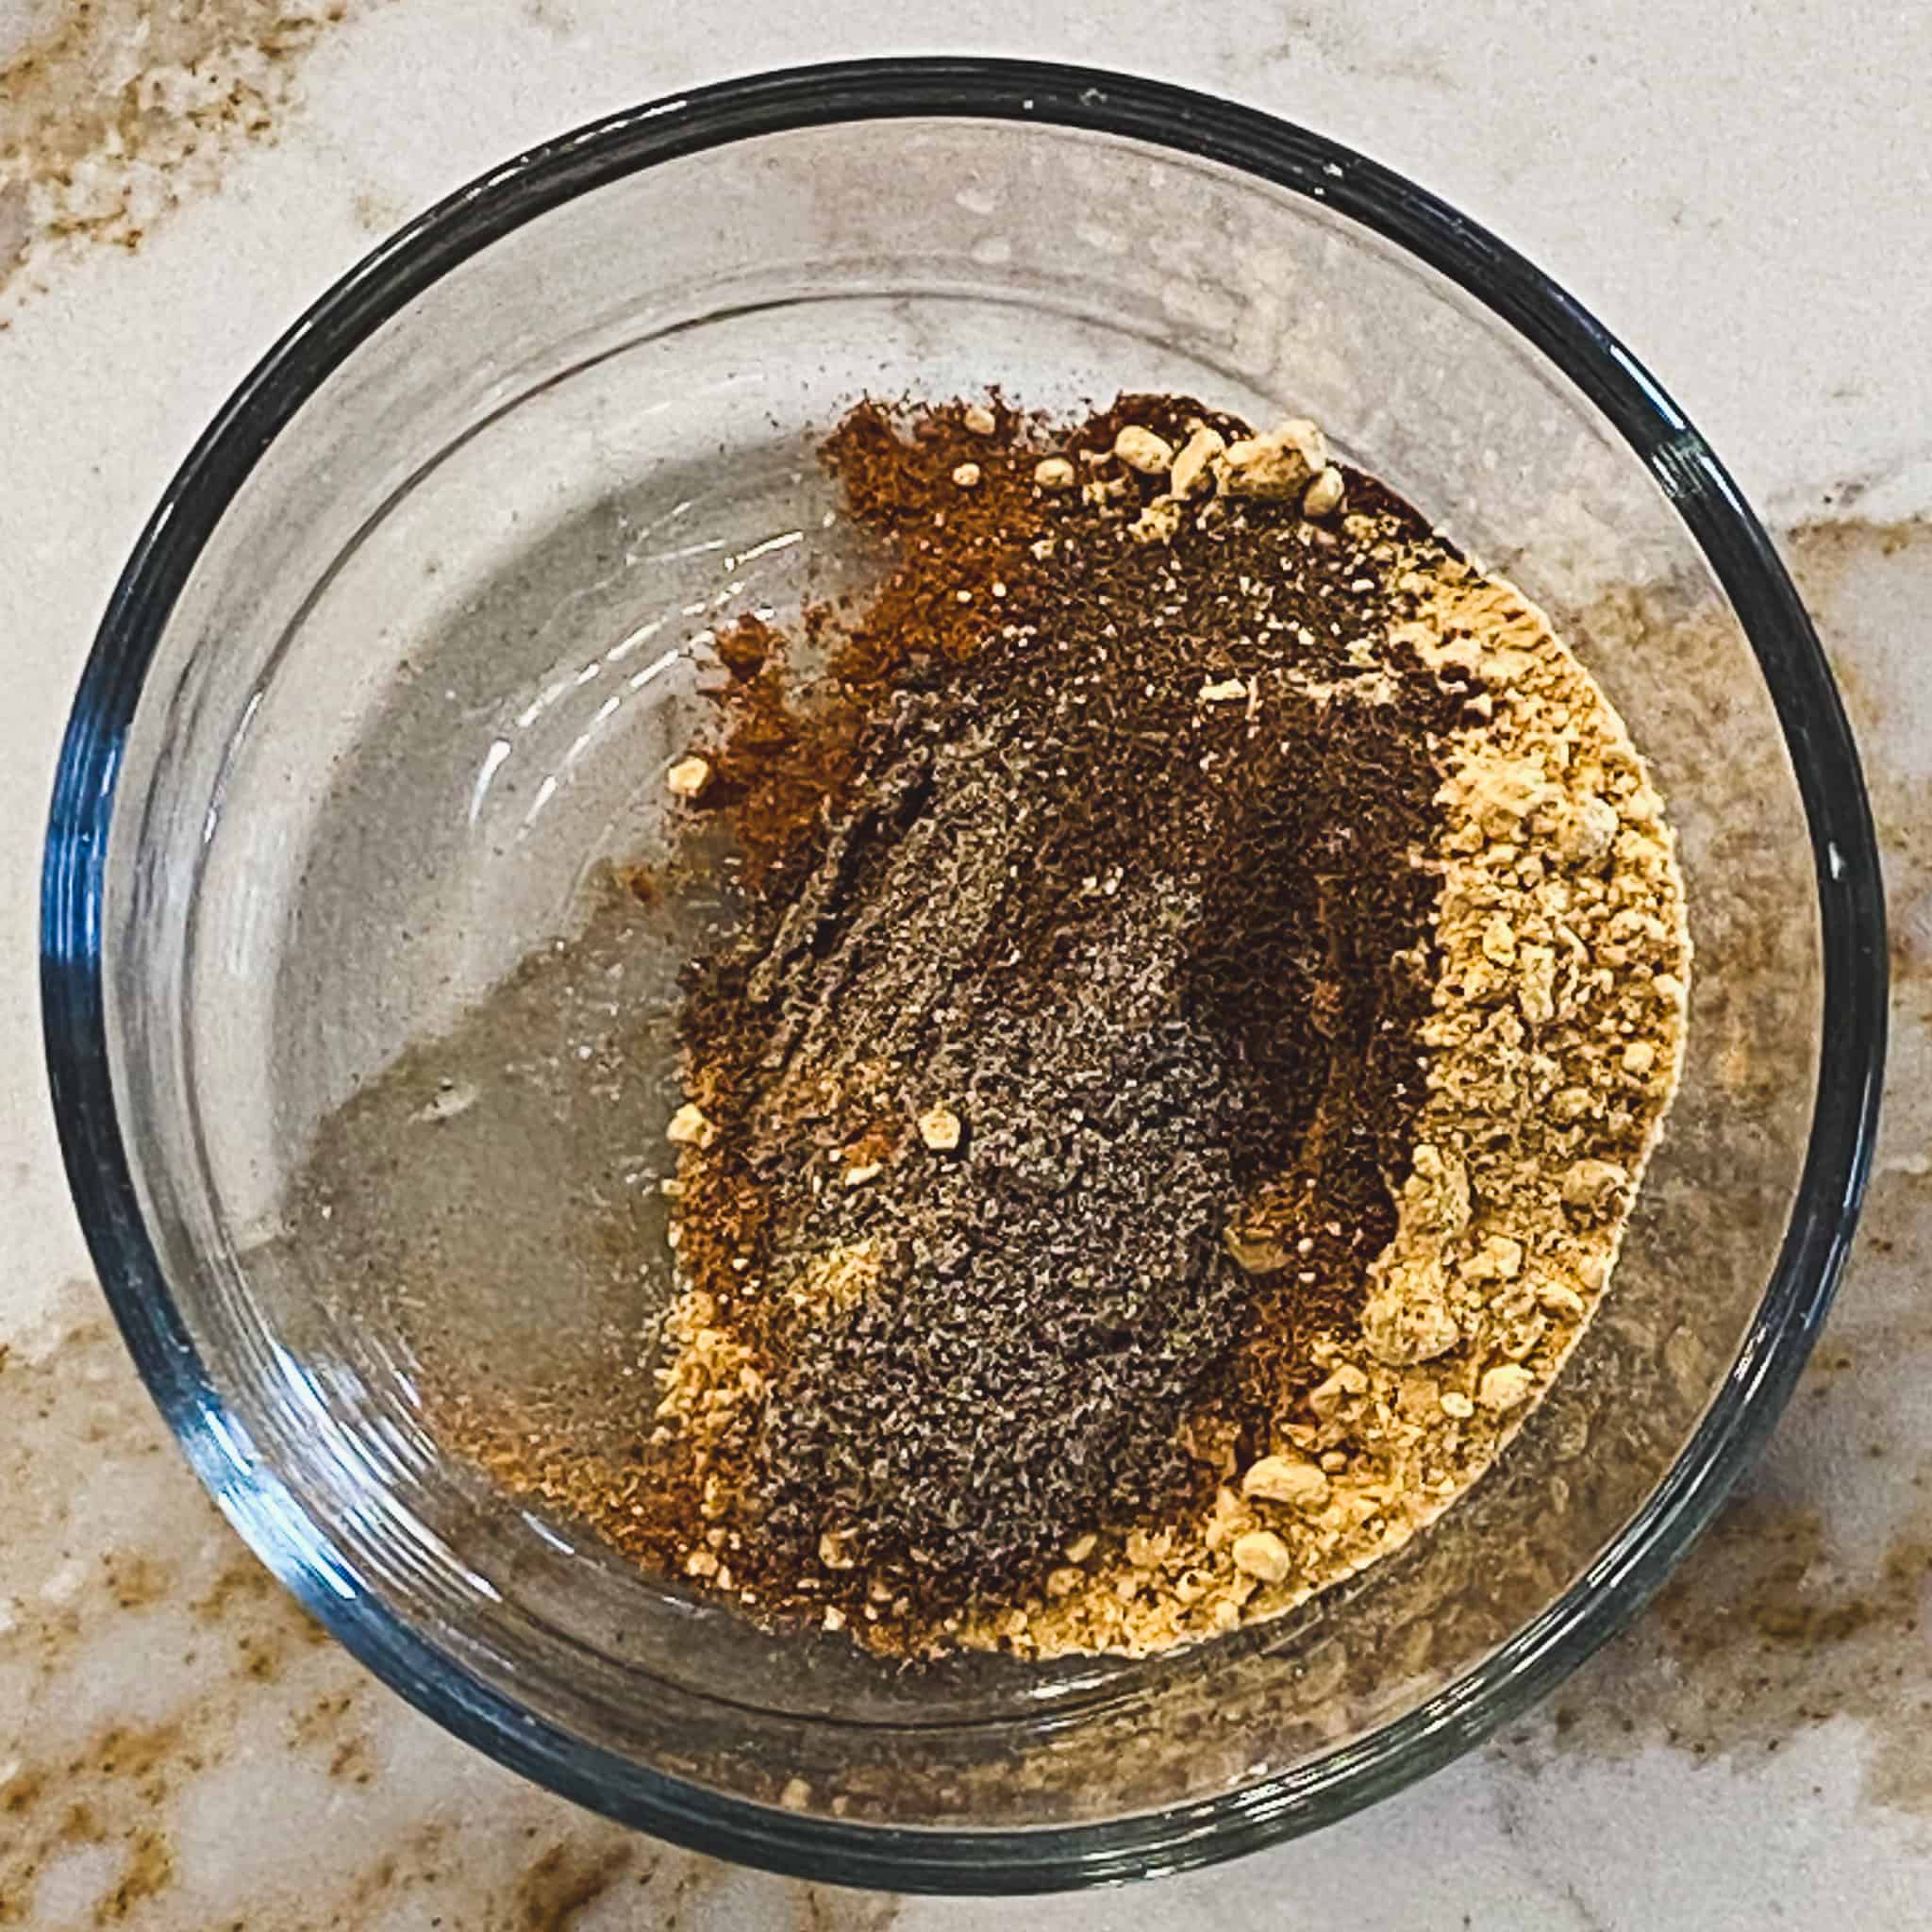 chai spices in a glass bowl, showing each spice.